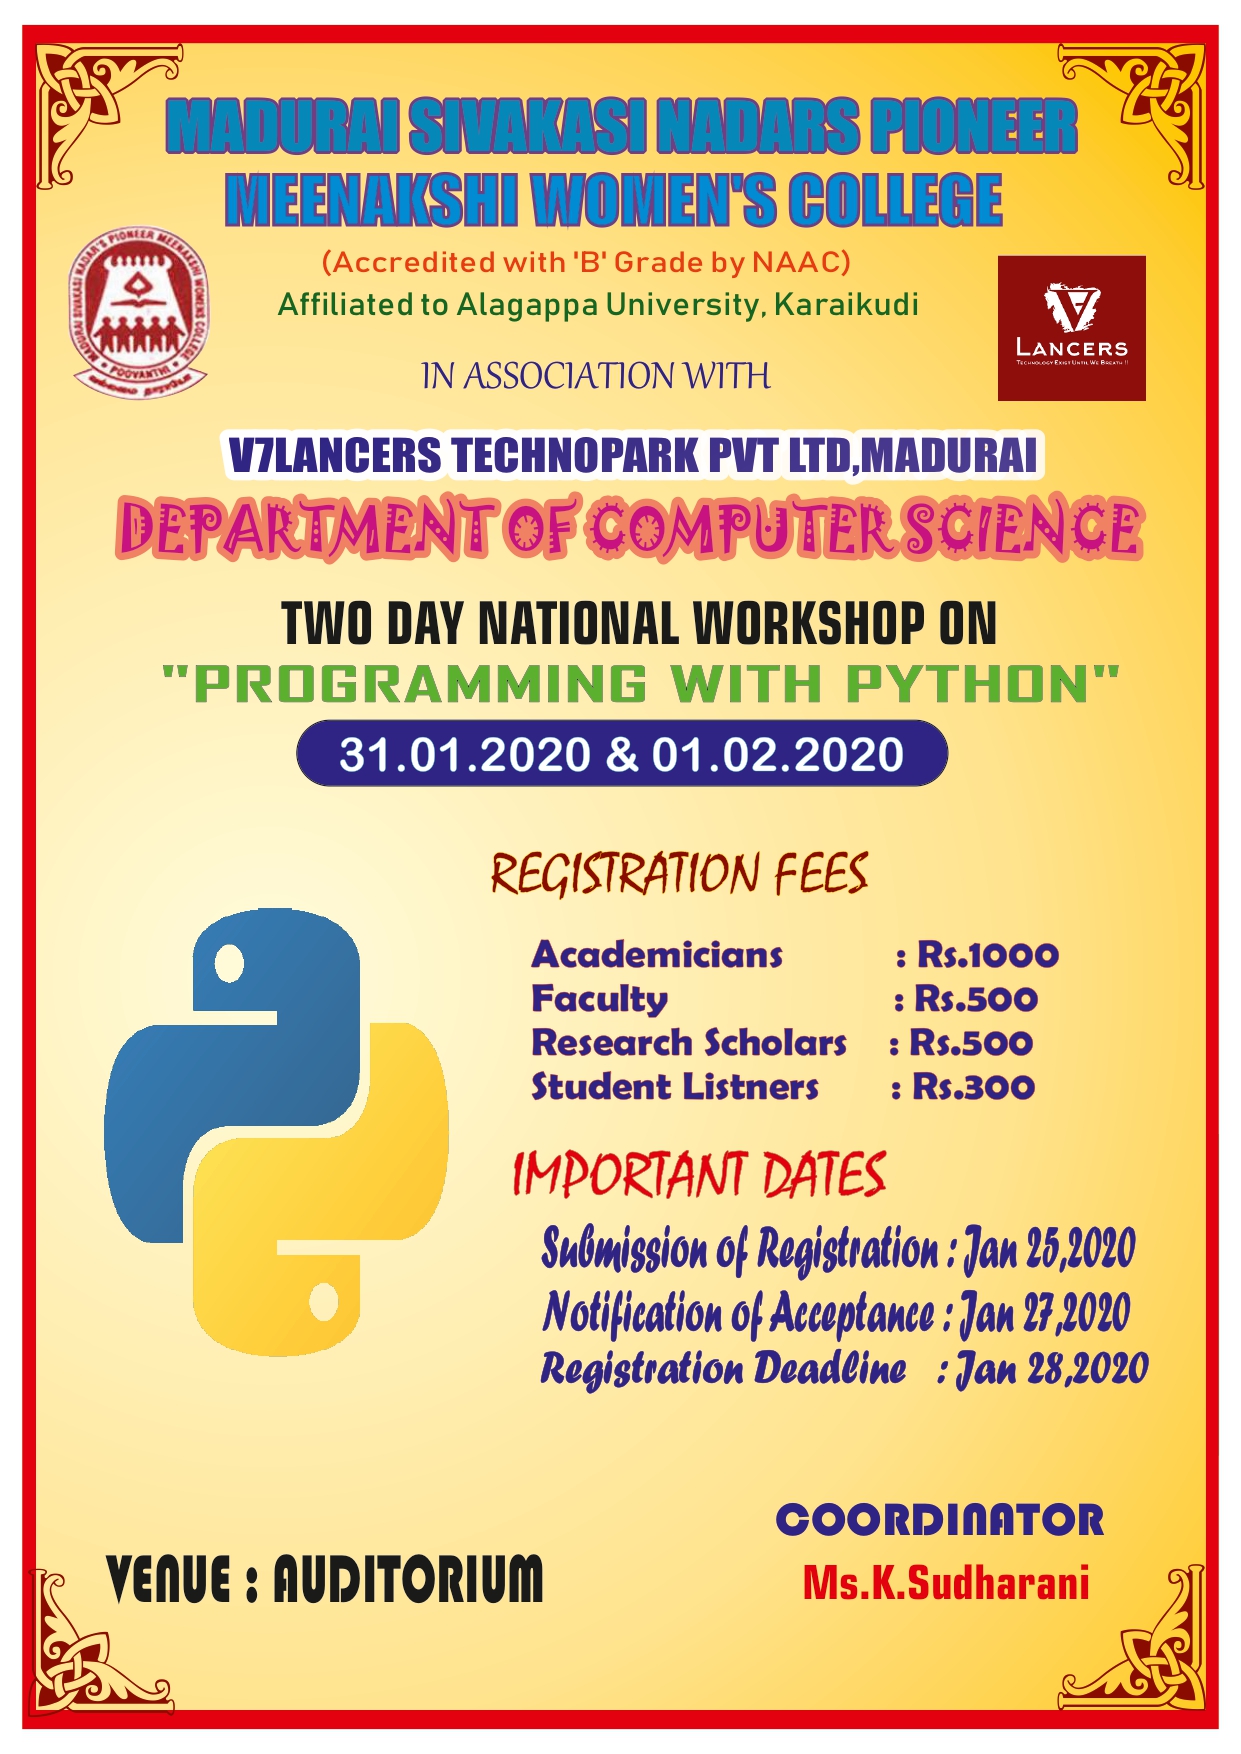 National Workshop on Programming with Python 2020